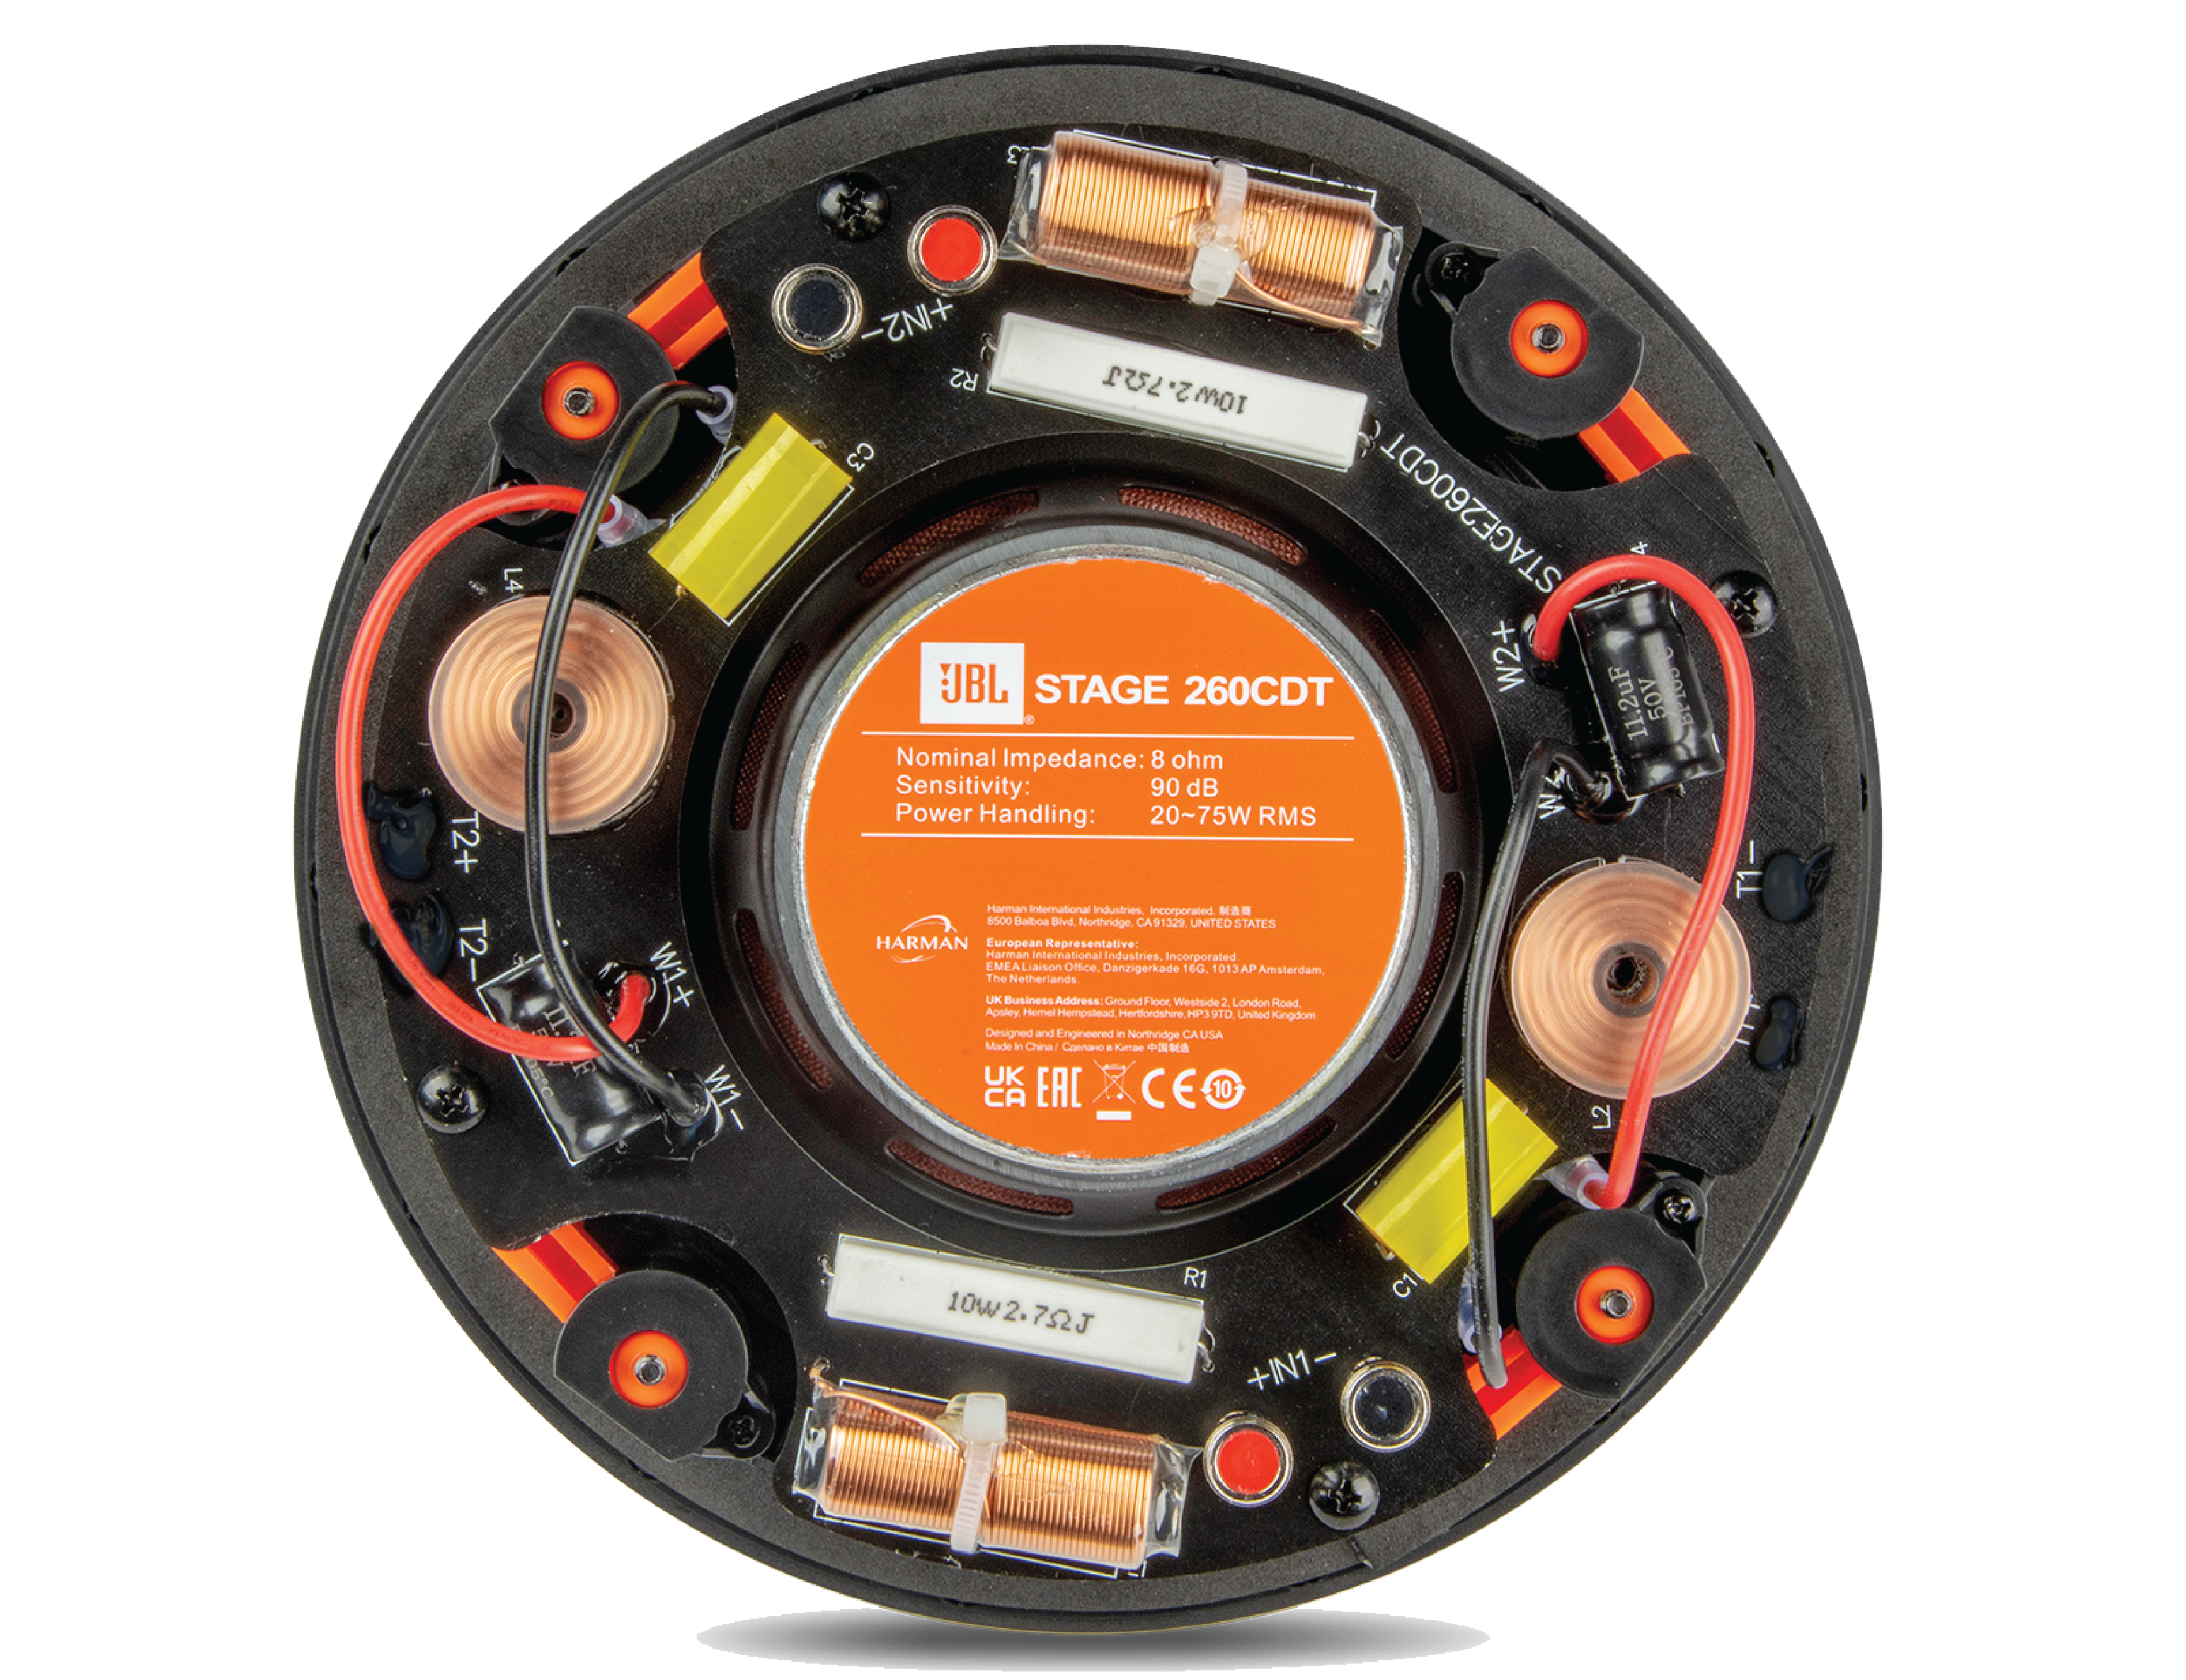 Premium air-core inductors and mylar cap capacitor crossover network components ensure that sound remains dynamic at all listening levels.